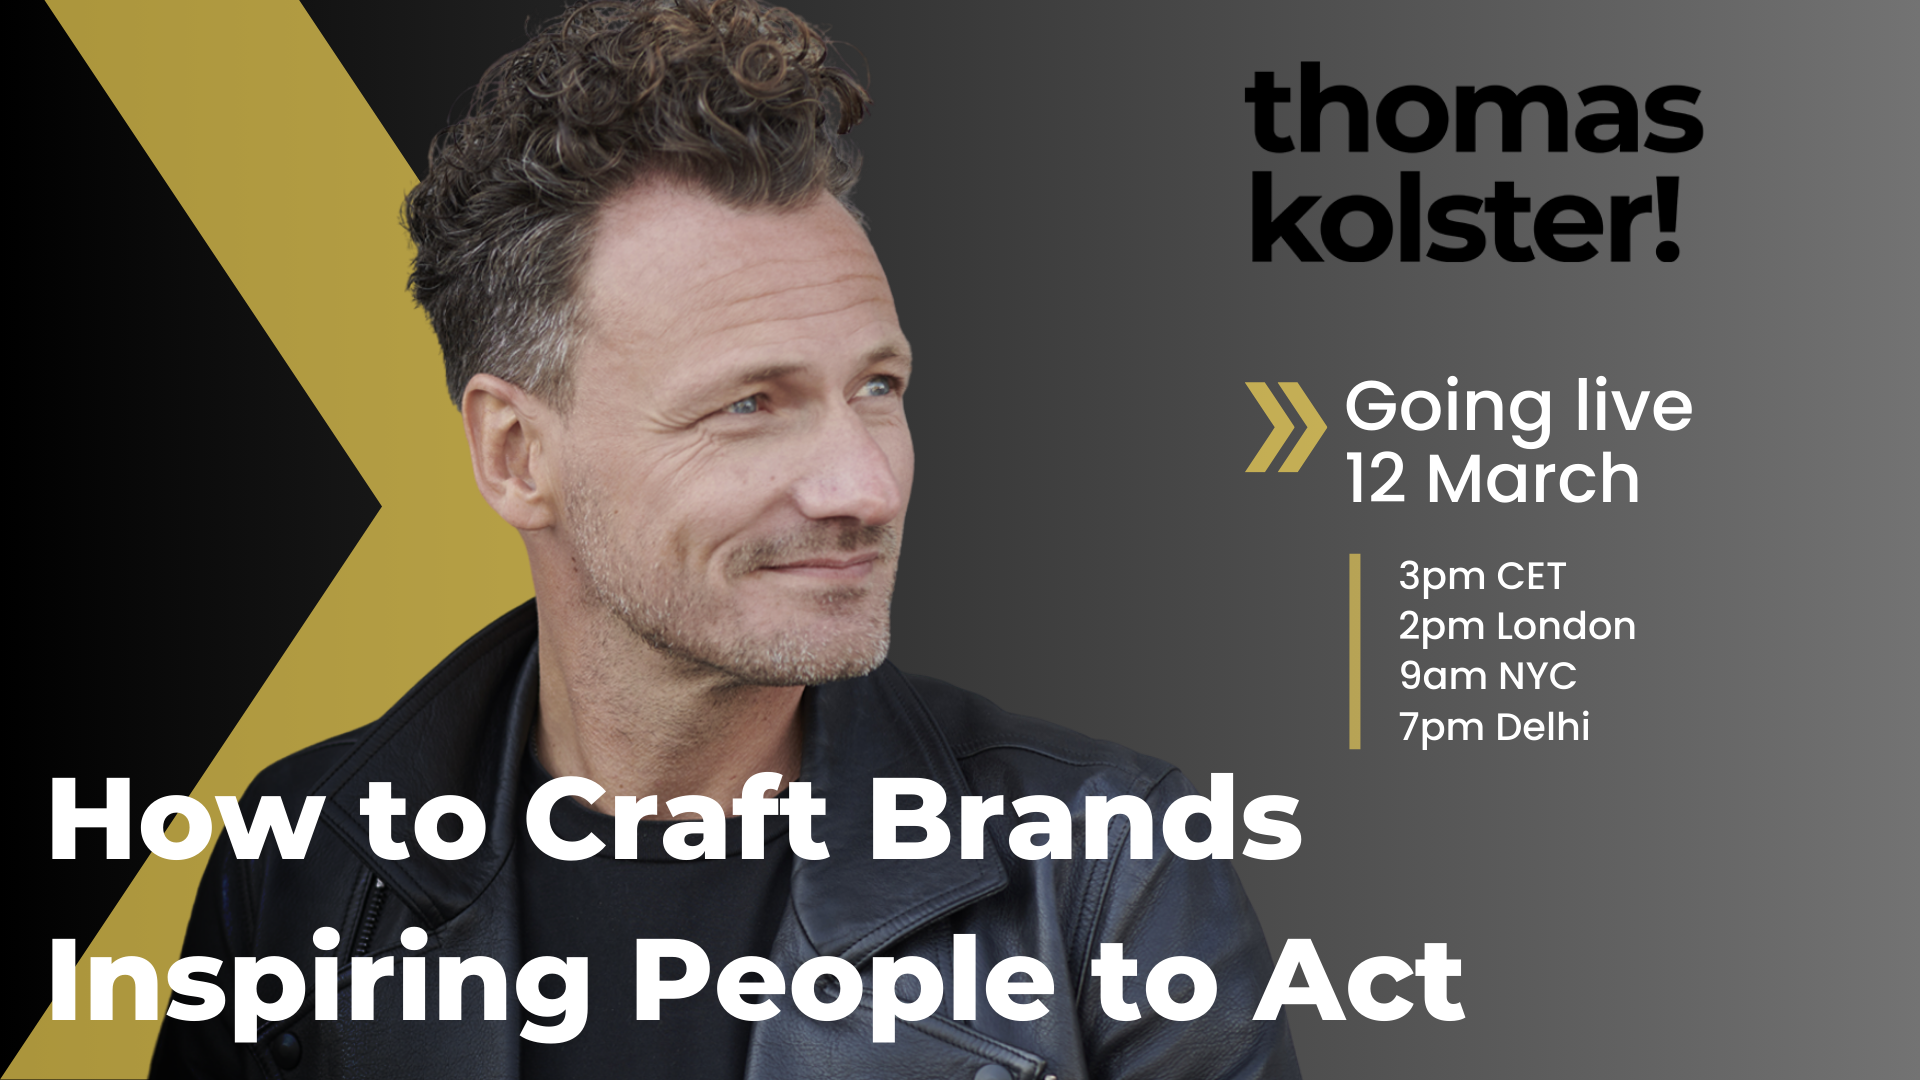 How to Craft Brands Inspiring People to Act